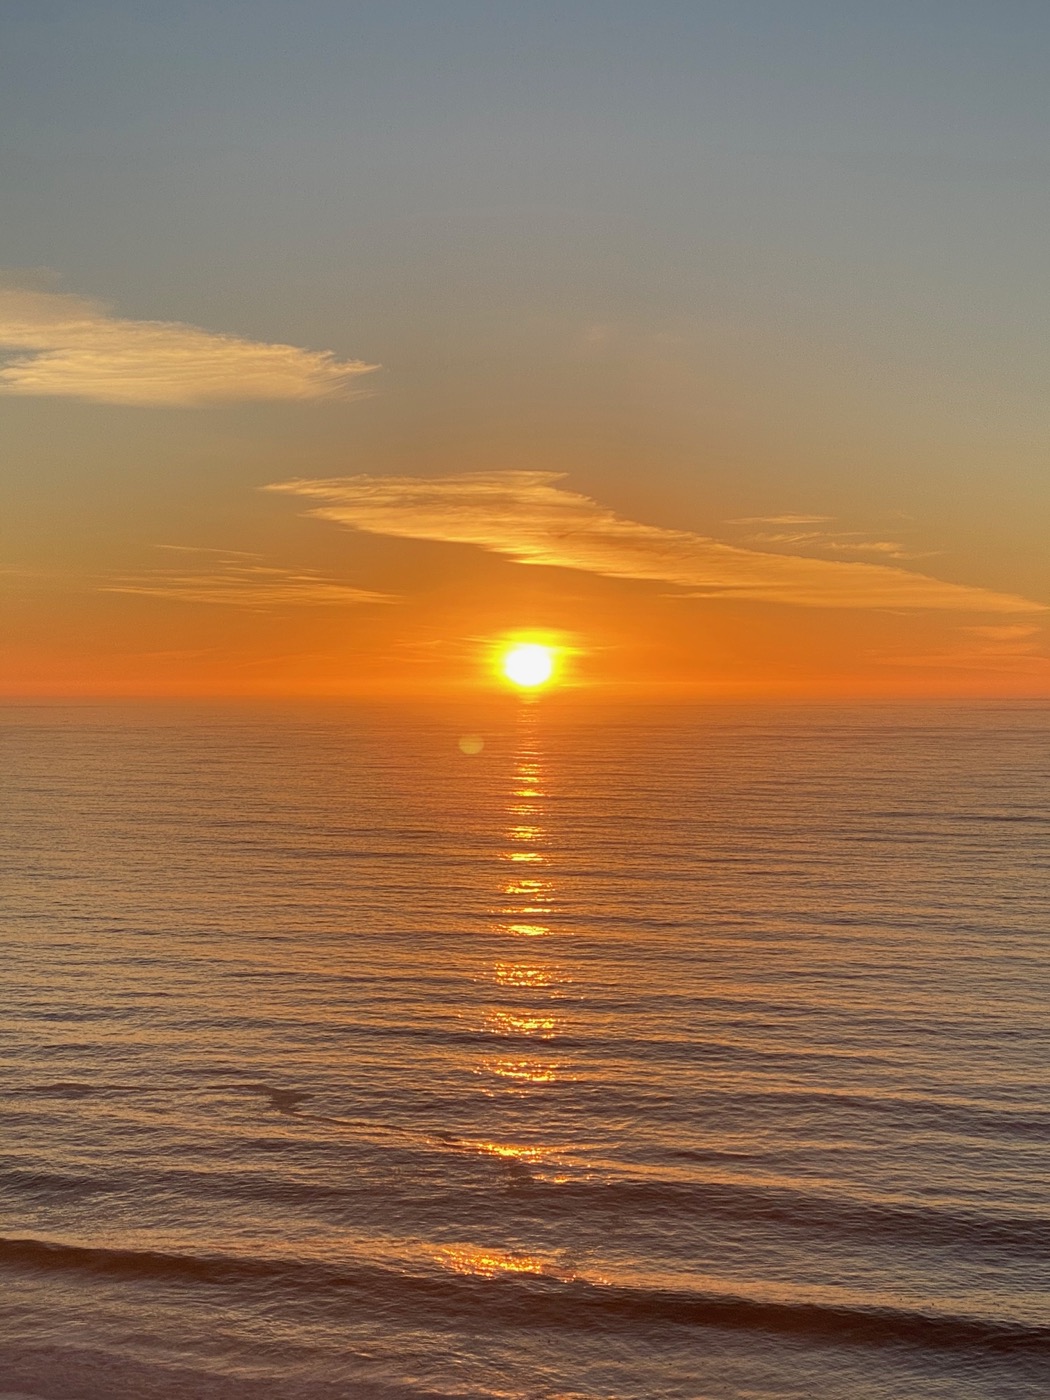 A sunset over the ocean